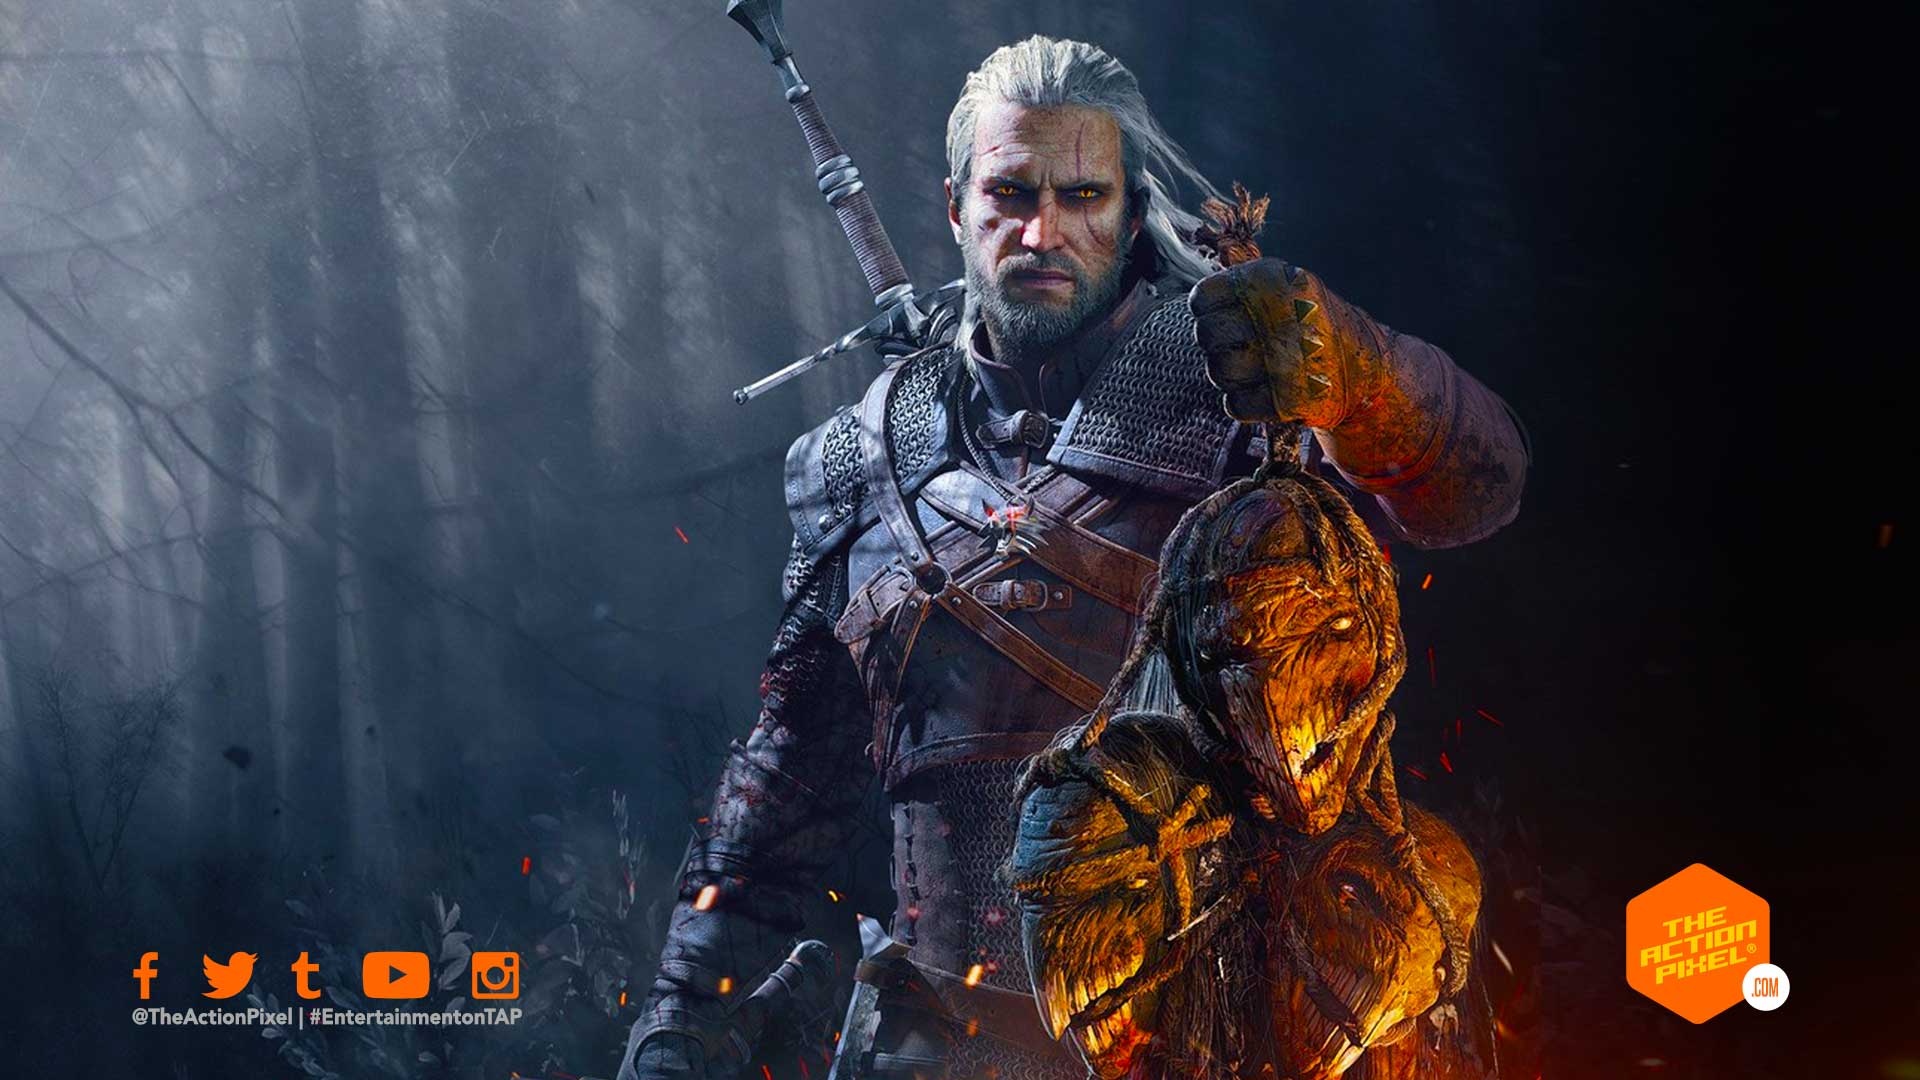 the witcher, the witcher nightmare of the wolf, the witcher: nightmare of the wolf, nightmare of the wolf, studio mir, netflix, anime, the witcher anime, the witcher anime movie, geralt of rivia, geralt, toss a coin to your witcher, toss a coin to your witcher oh valley of plenty, wild hunt, featured, netflix anime, the action pixel, entertainment on tap,